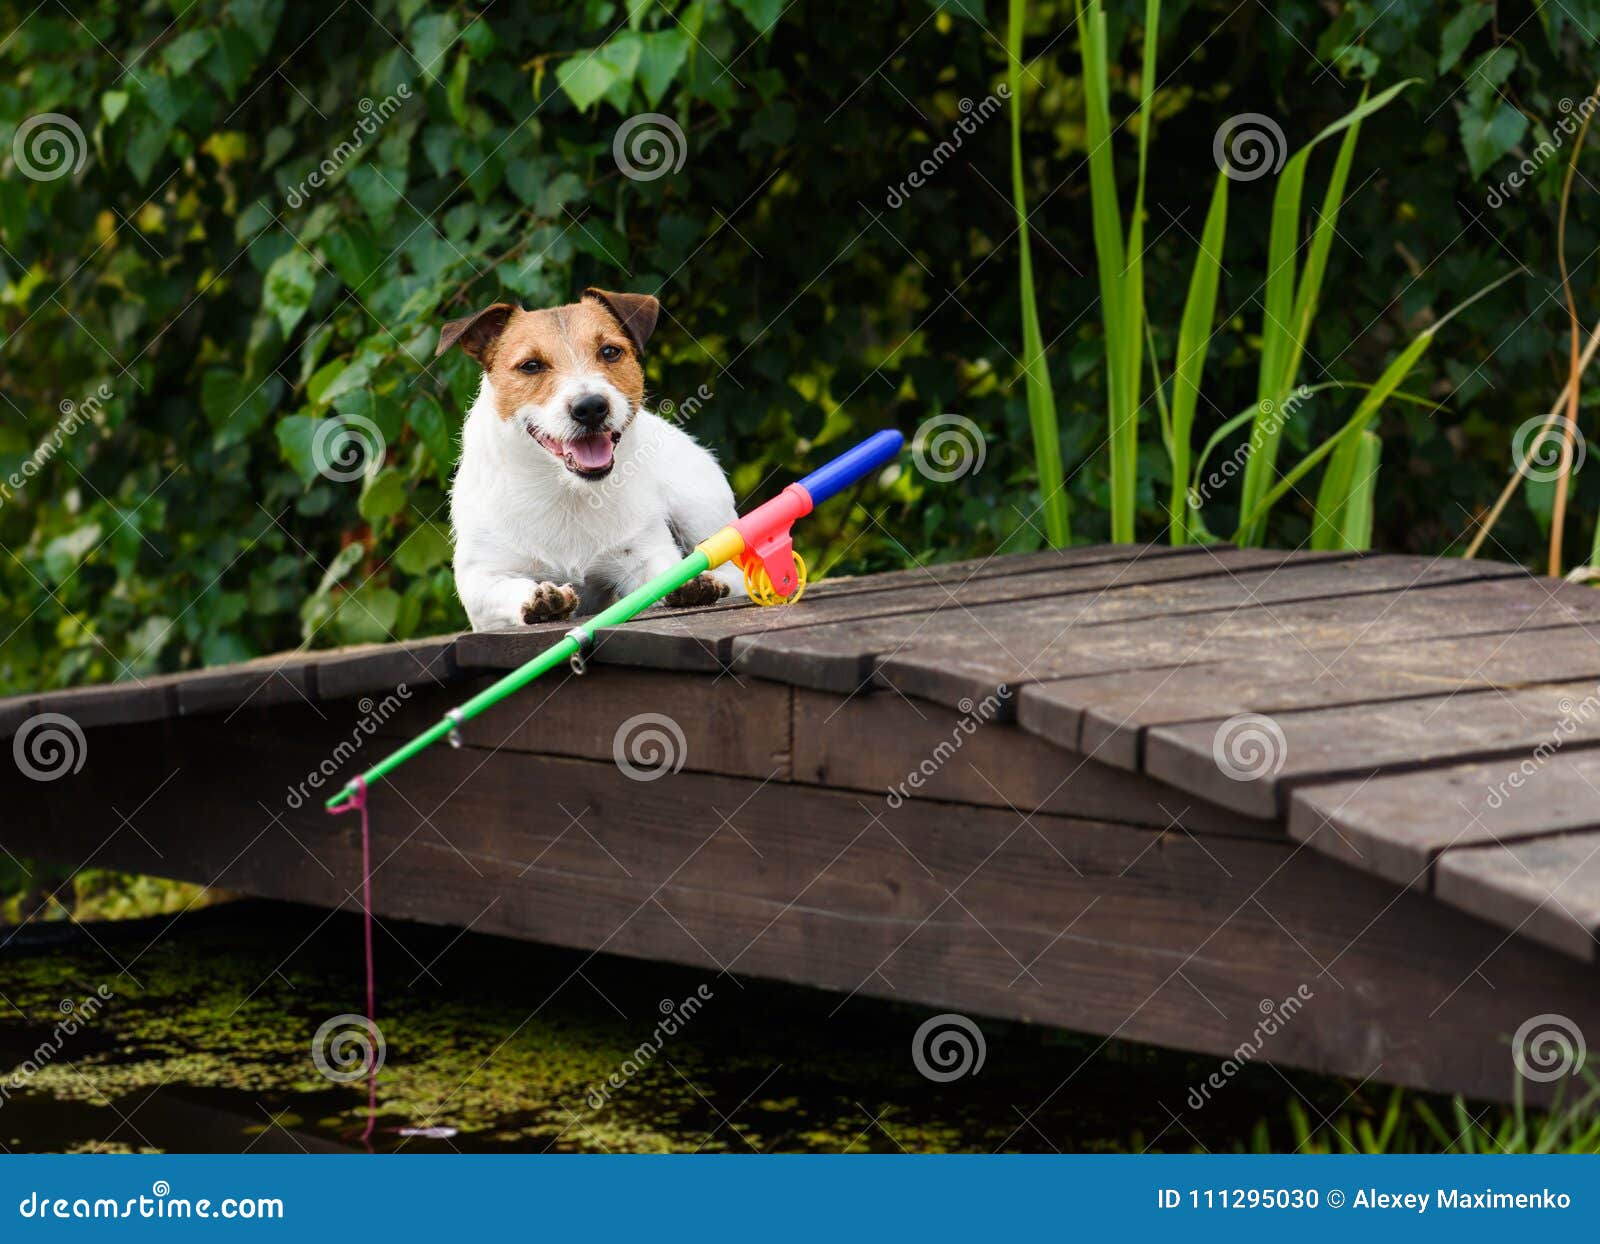 Concept of Fishing for Beginners and Dummies with Dog and Rod Stock Photo -  Image of angling, angler: 111295030